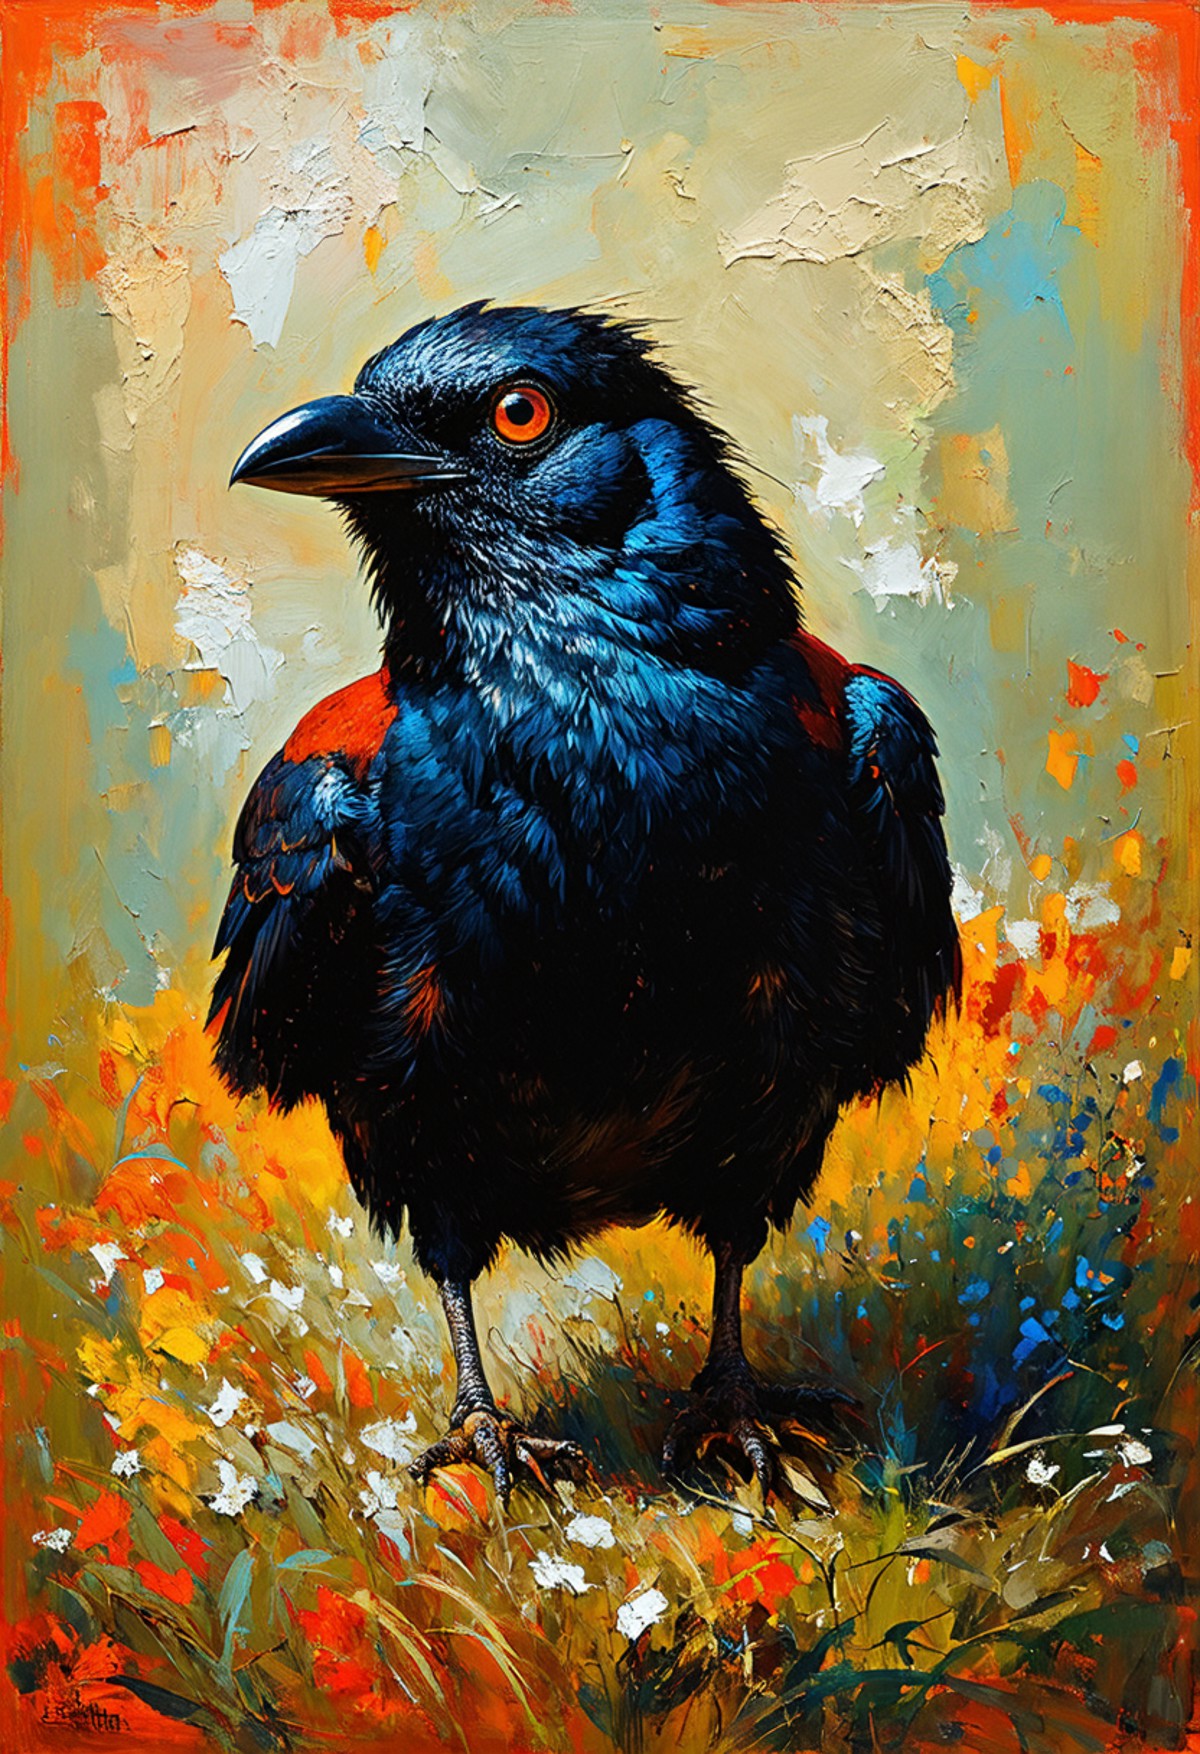 A raven standing in a field of colorful wildflowers. The bird’s plumage is predominantly black with hints of blue, that draws attention against the softer background hues. 